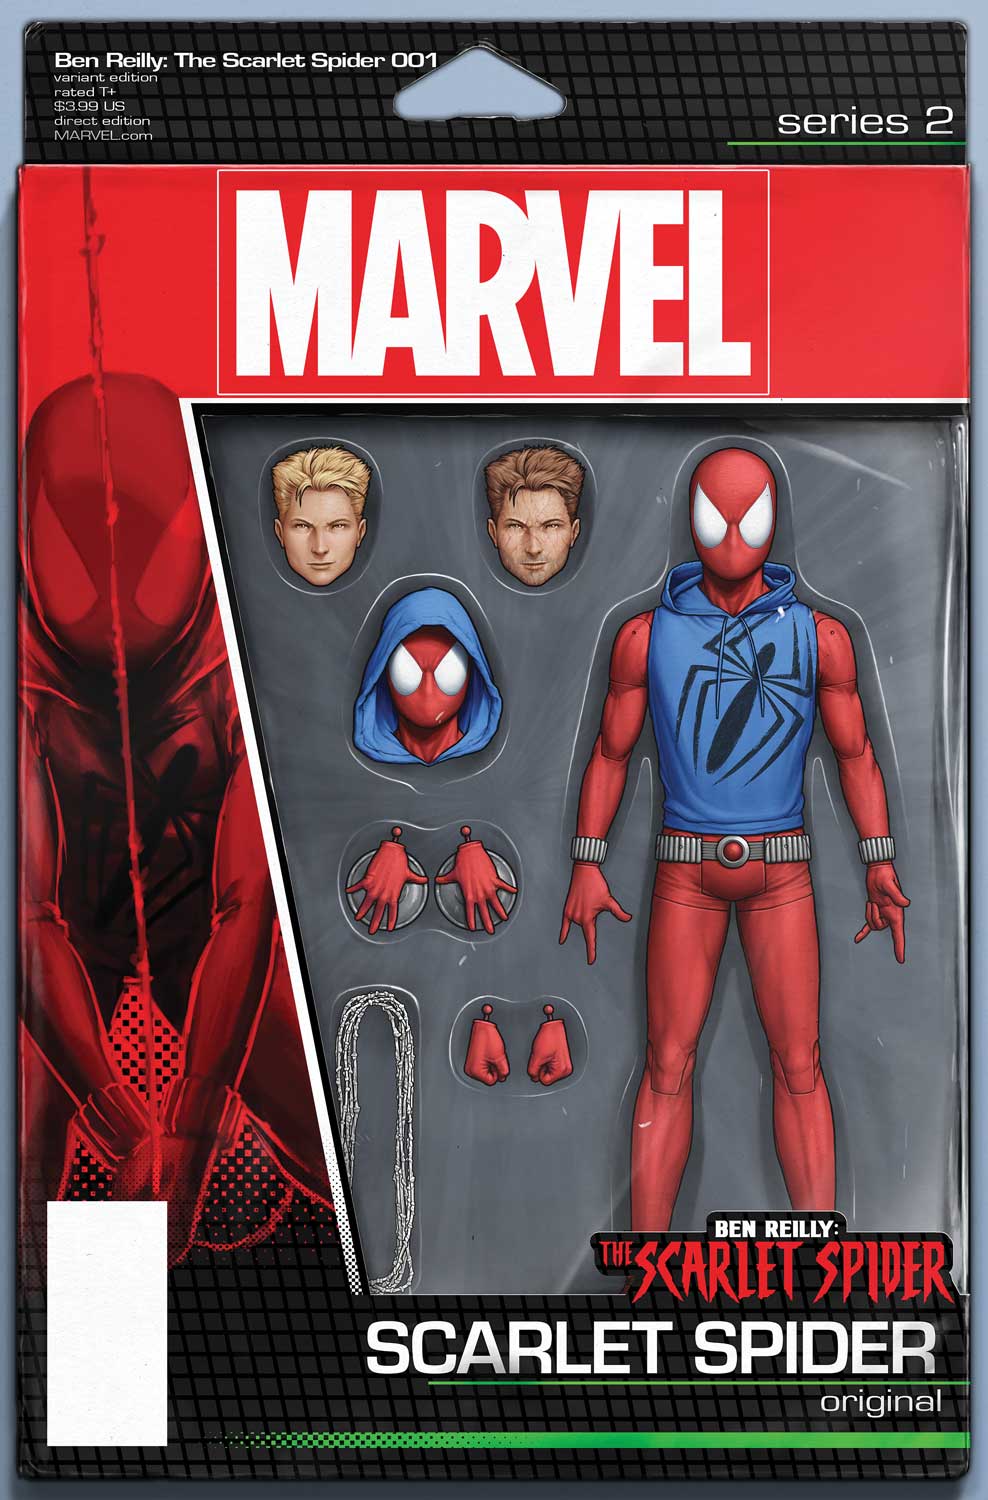 Ben_Reilly_The_Scarlet_Spider_1_Christopher_Action_FIgure